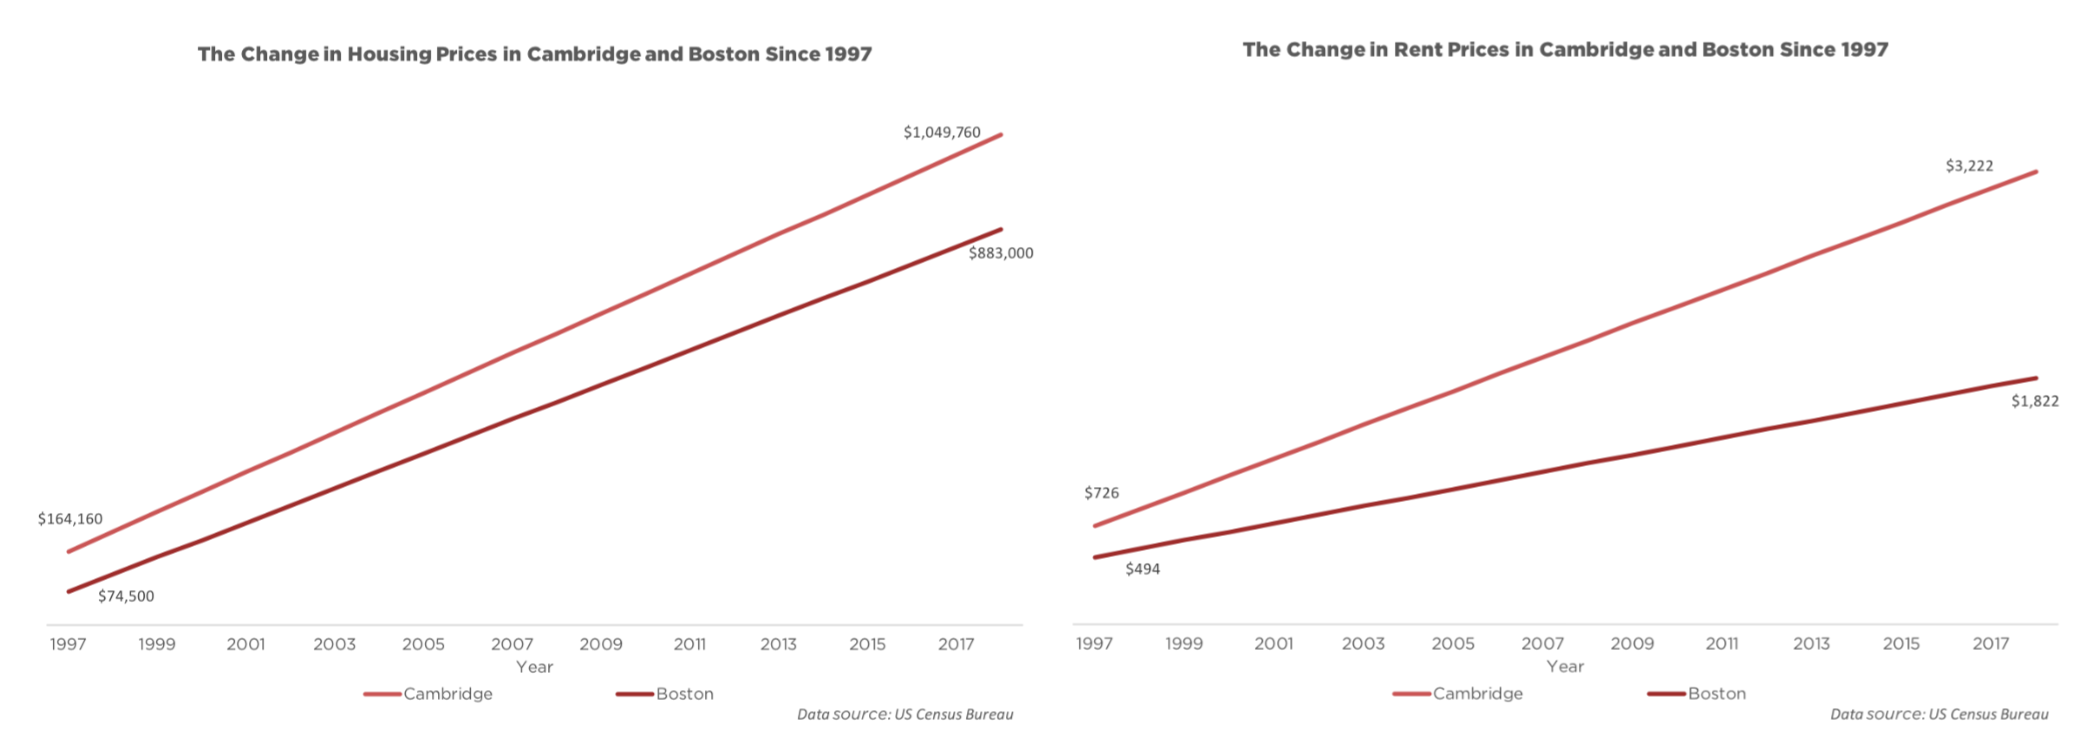 Graph showing the change in housing and rent prices in Cambridge and Boston between 1997 and 2017. The average cost of a home has risen from $164,160 to $1,049,760 in Cambridge over that time, and average rent in Cambridge has skyrocketed from $726 to $3,222 per month.